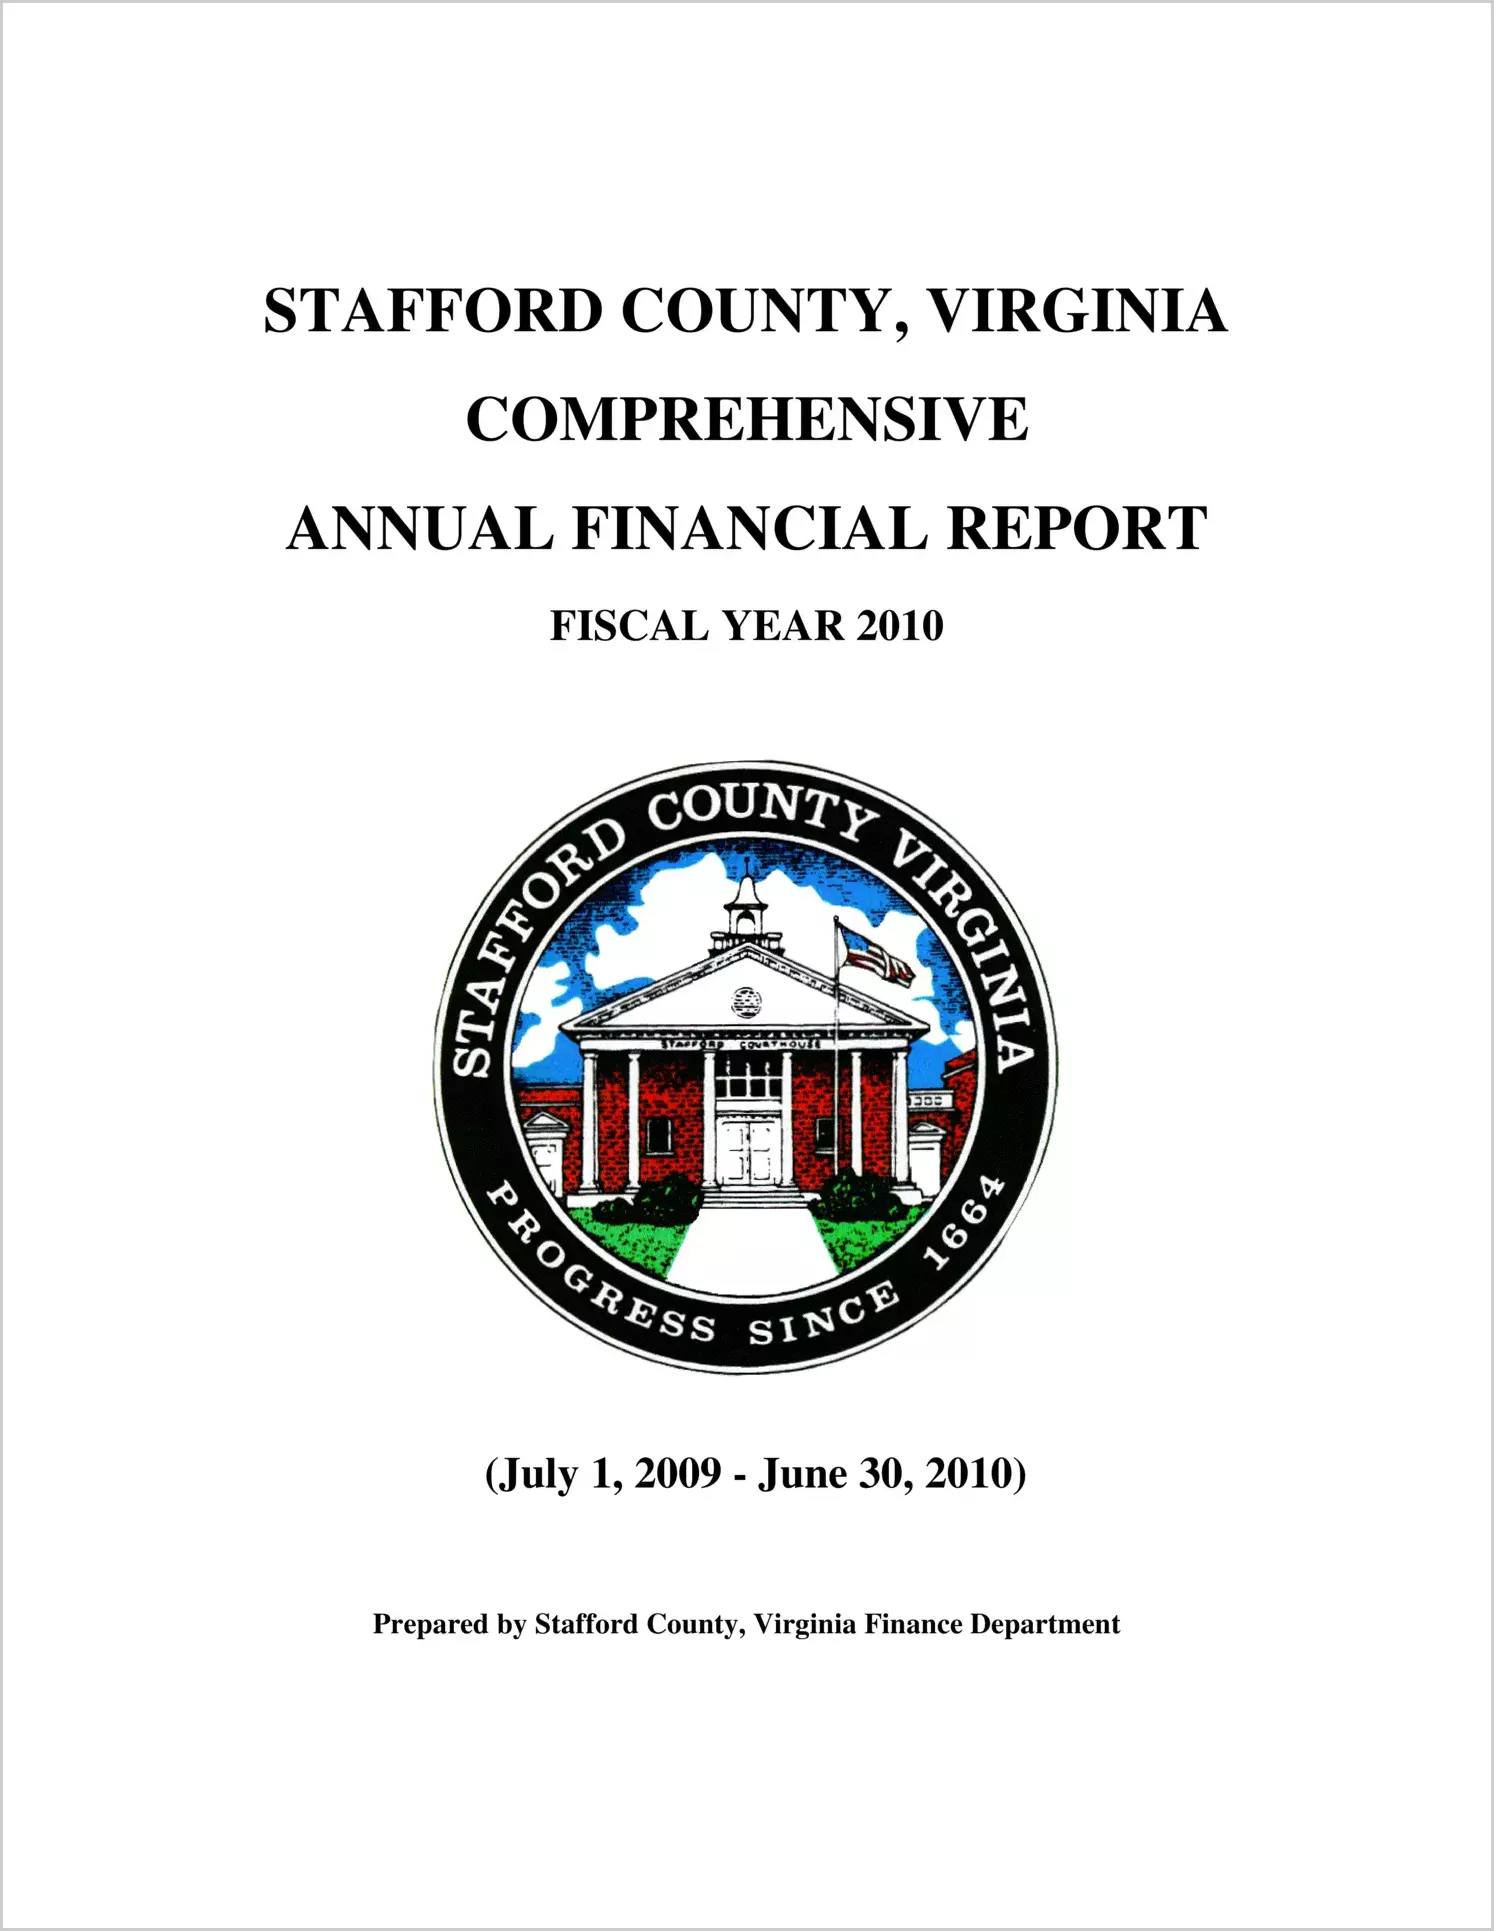 2010 Annual Financial Report for County of Stafford